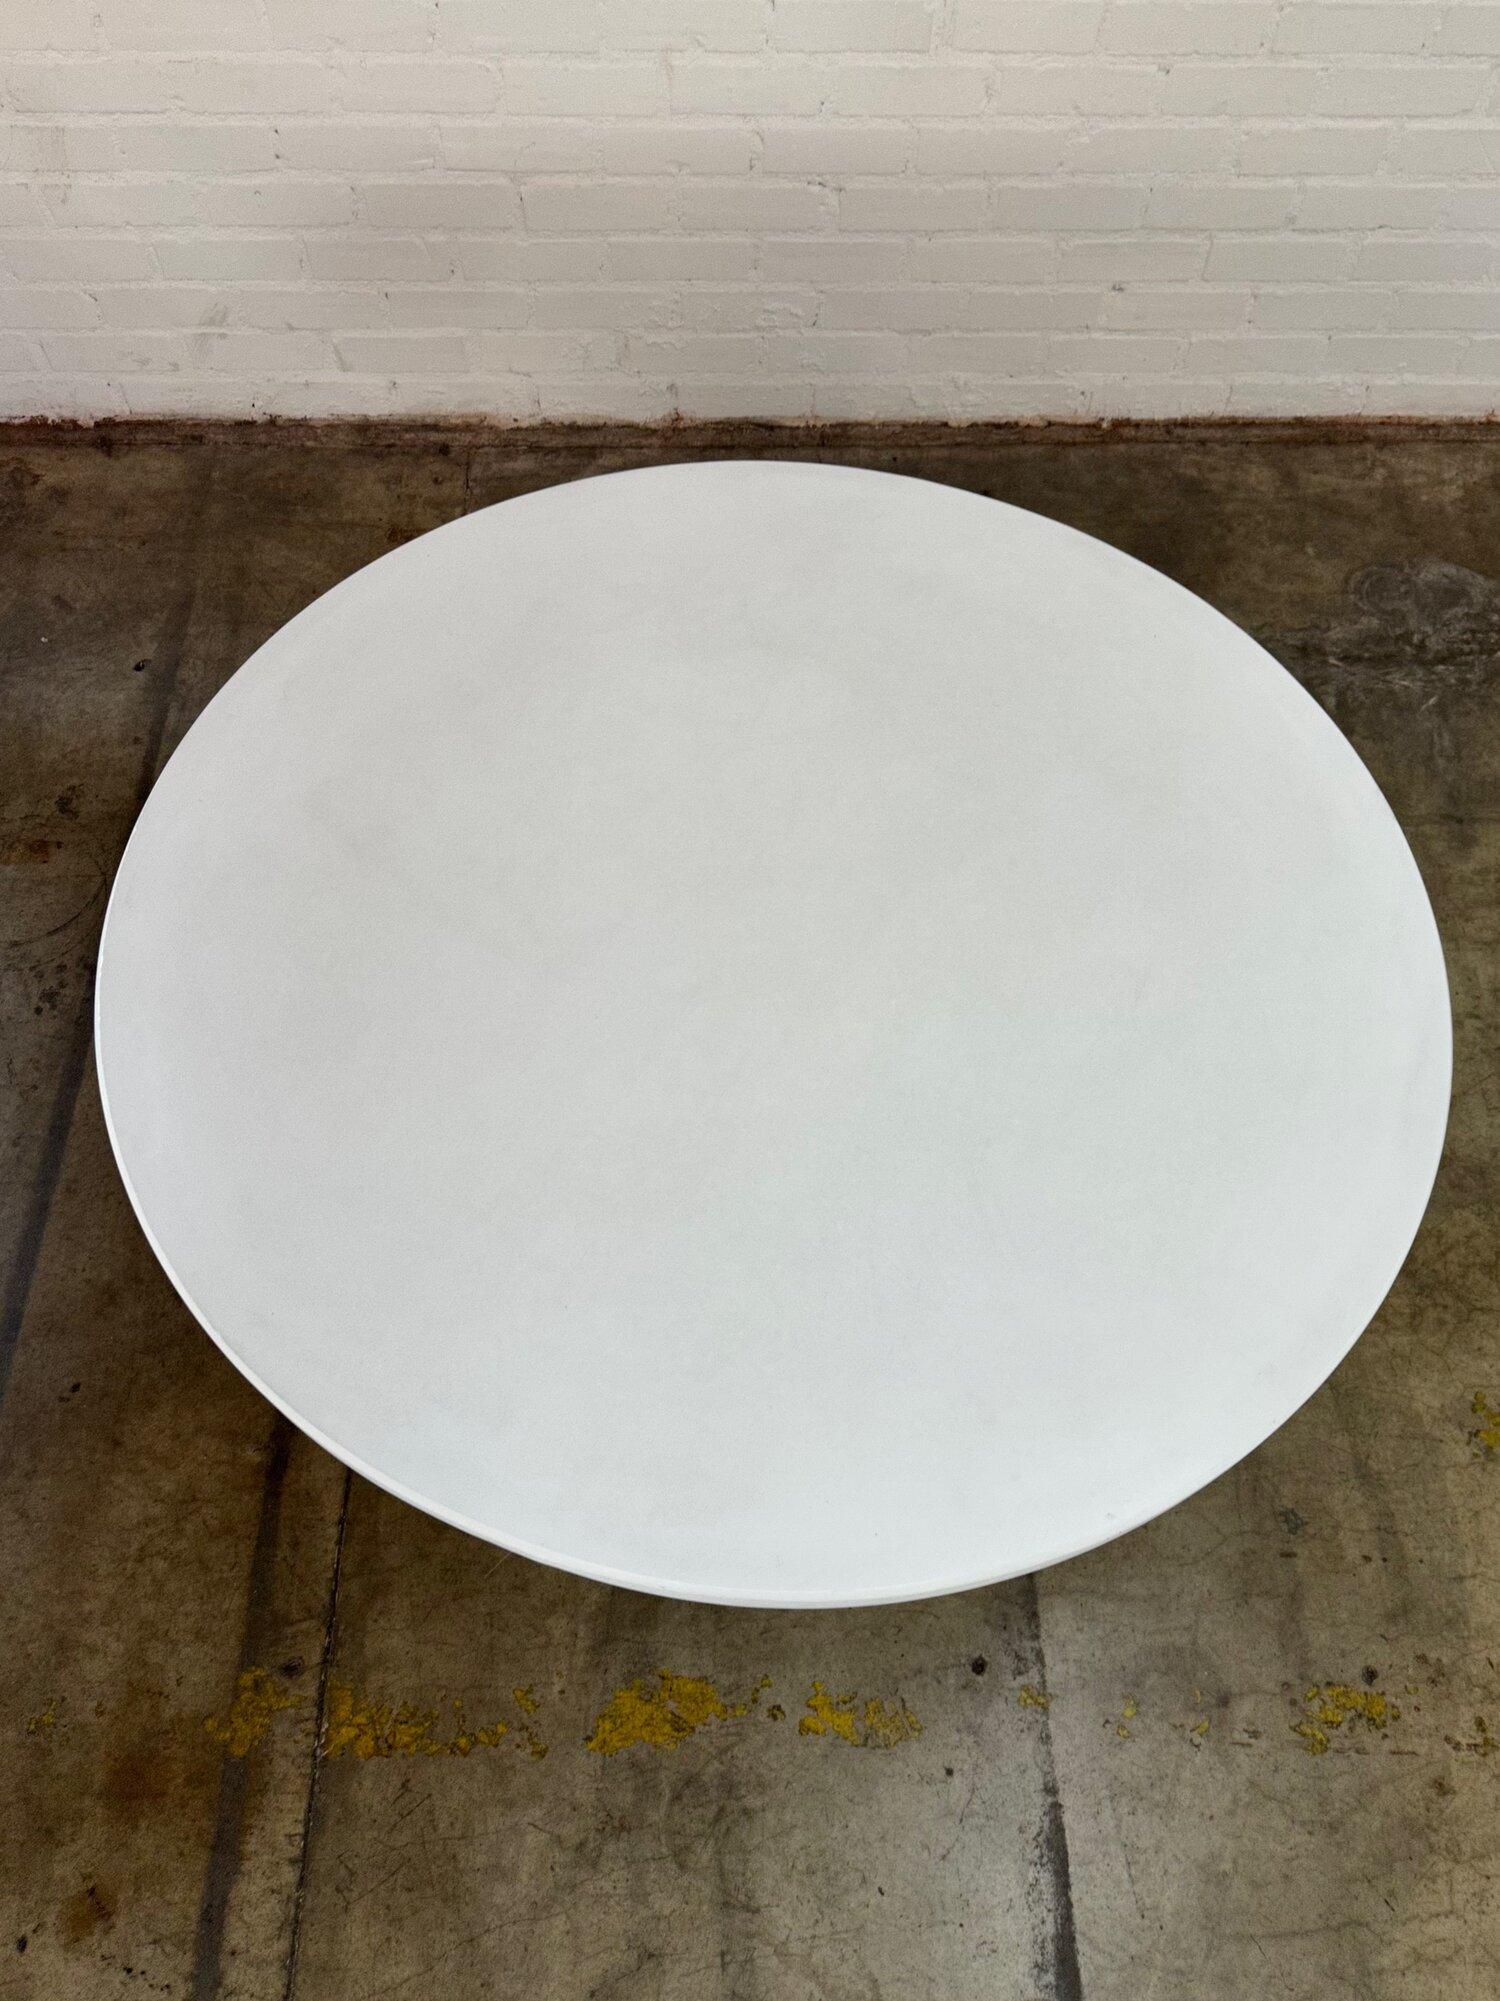 W55.5 D55.5 H30 KC27.5

Vintage stone surface in white on a handcrafted ribbed pedestal table. Stone surface was a new left over surface from an in house project. Stone is crafted to look and feel organic. Stone is slightly textured throughout as